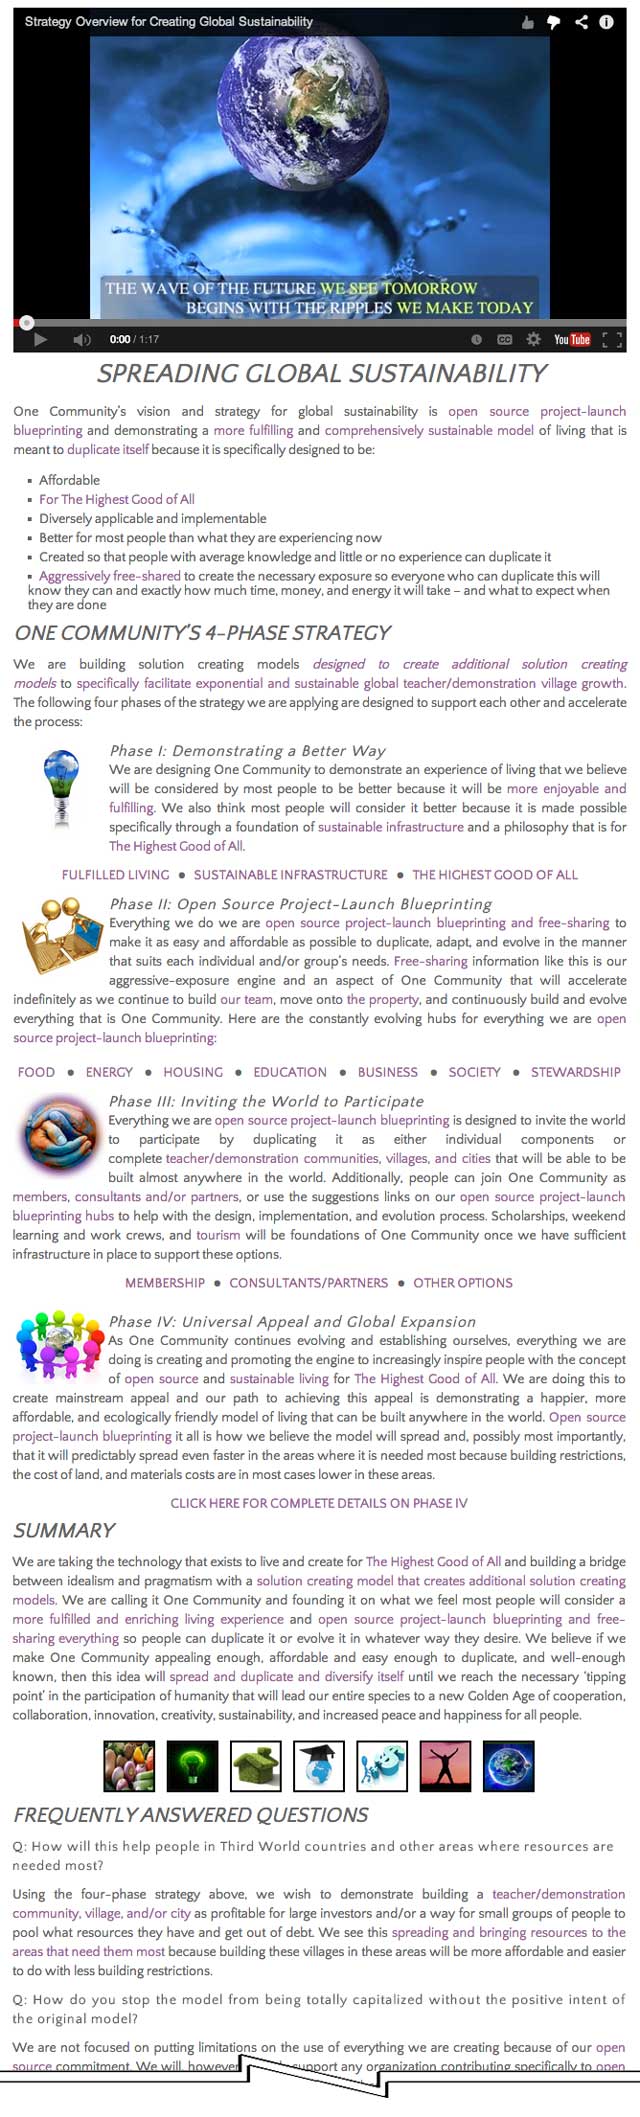 Creating a World that works for everyone, 4-Phases of Global Transformation page and the six foundational human needs page updated, One Community